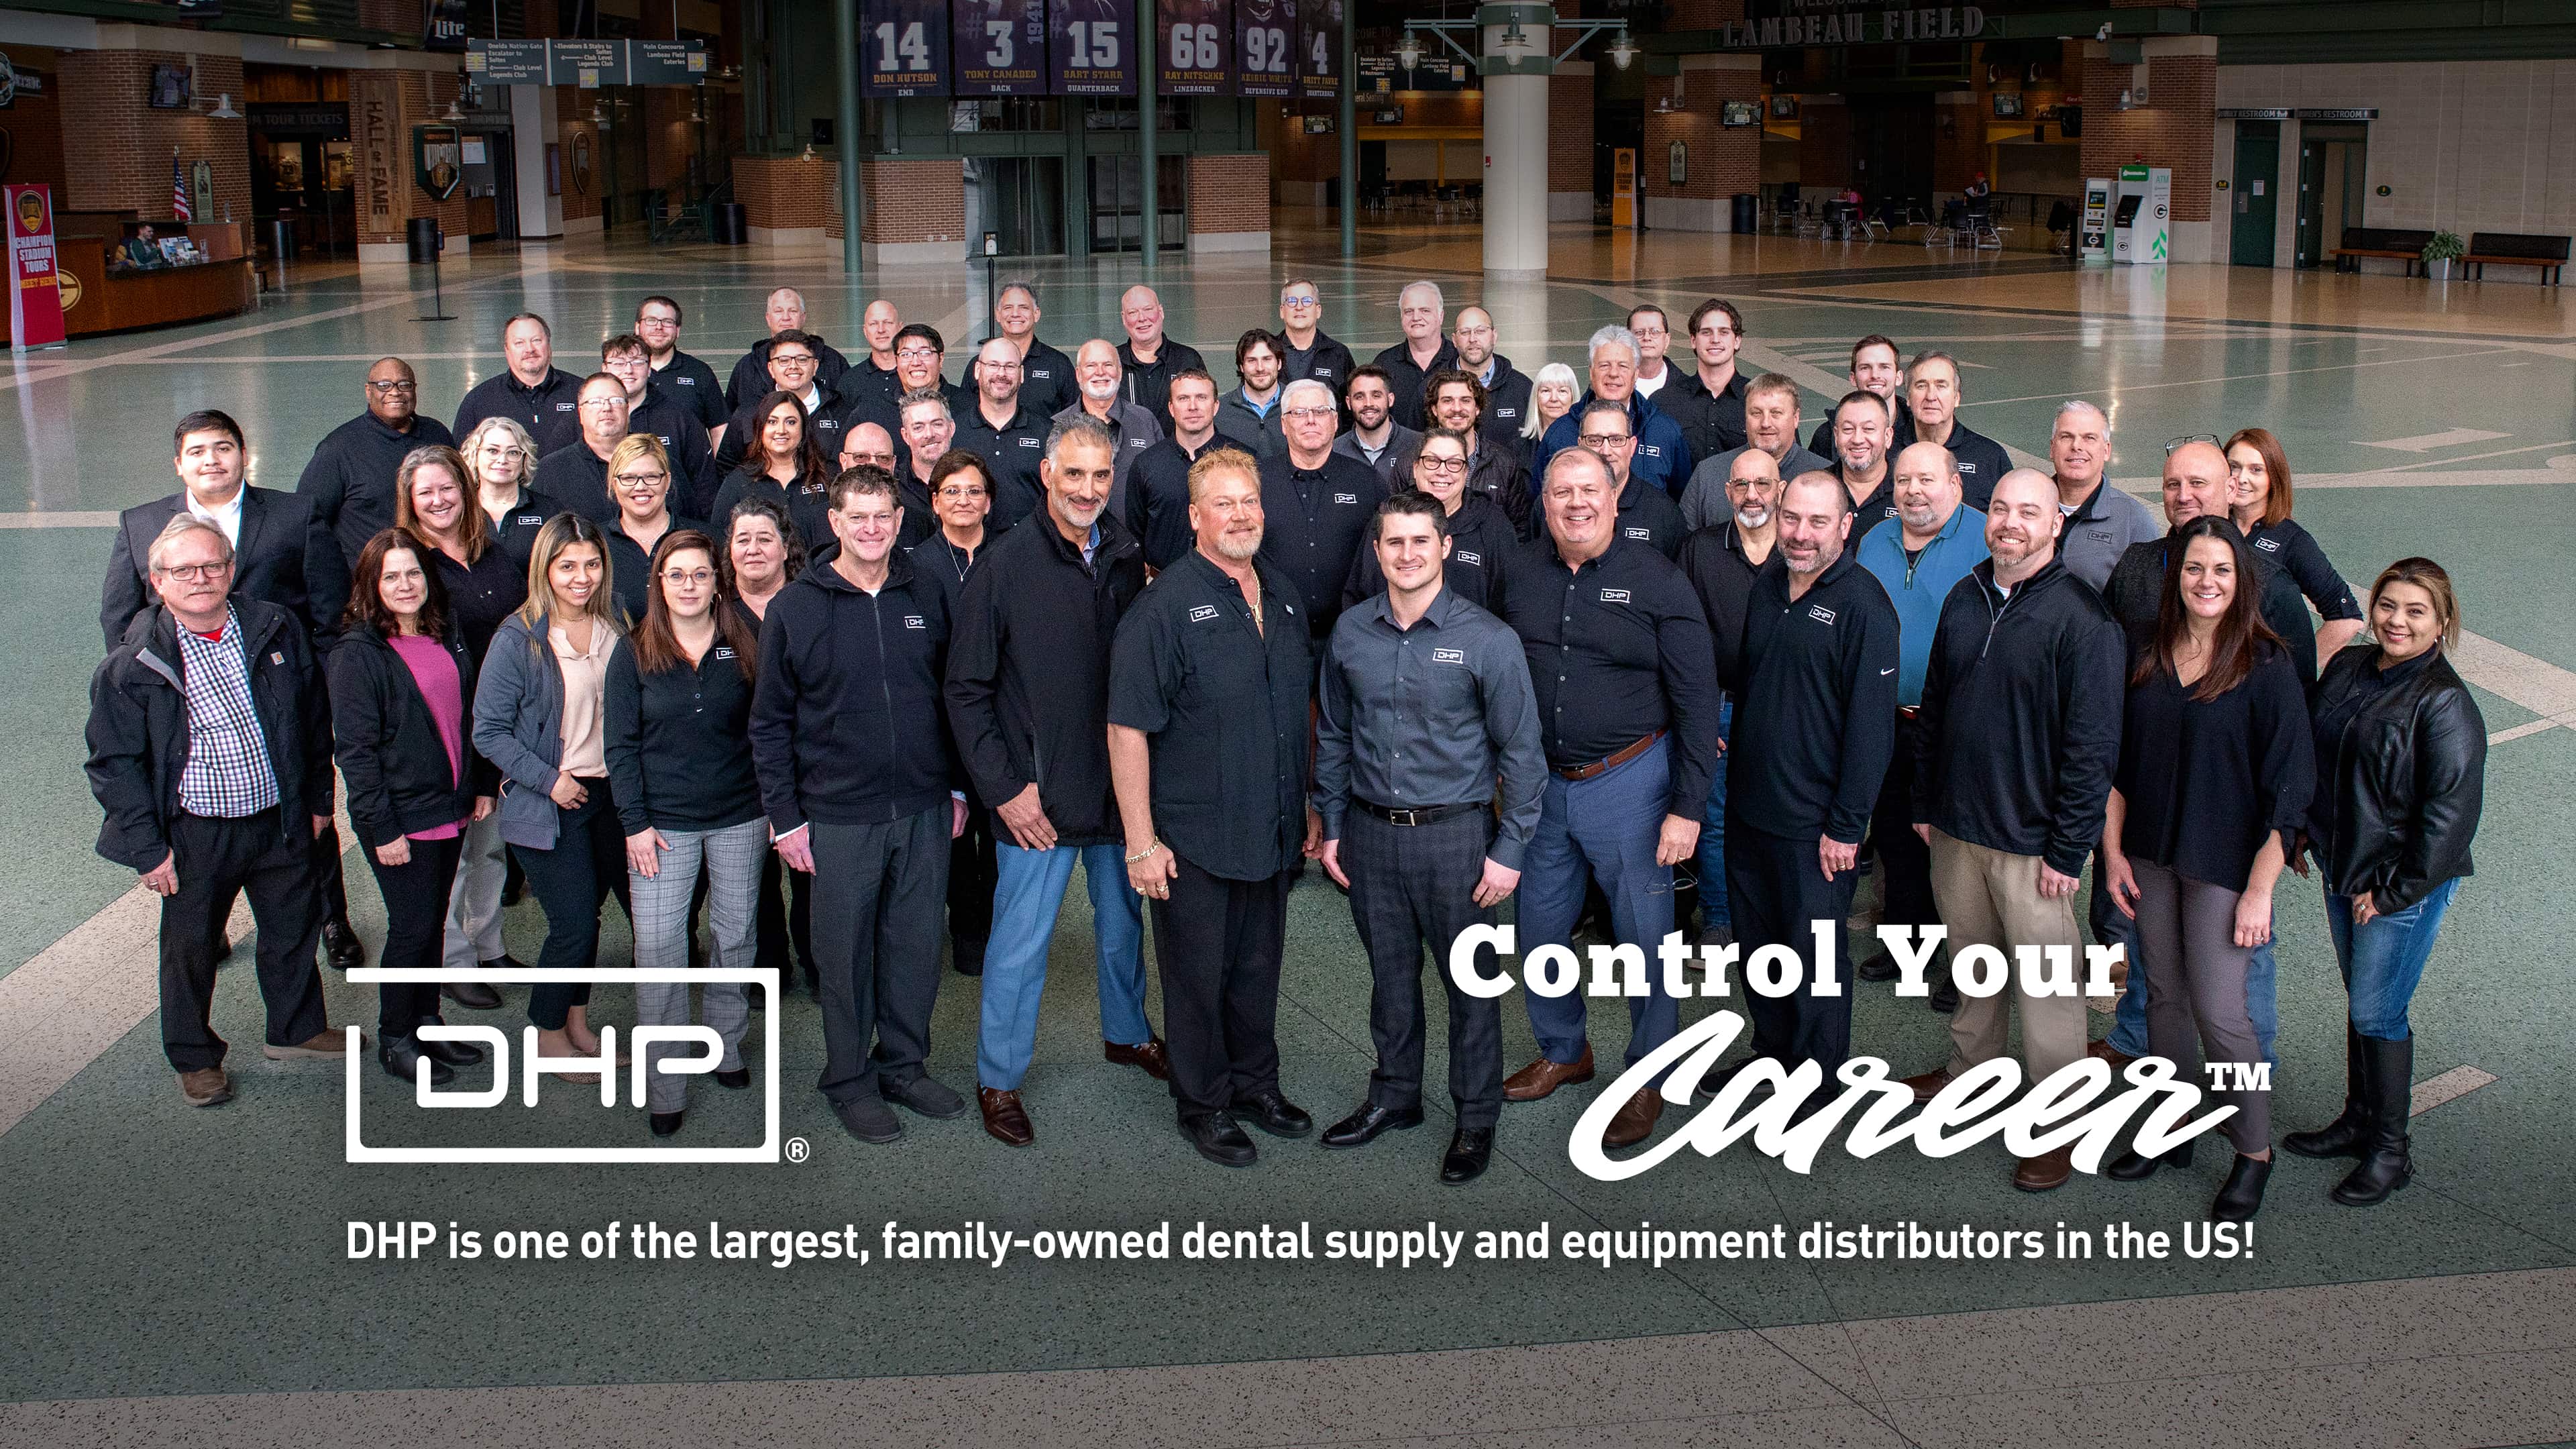 DHP is hiring to support our growth!
With over 30 years of experience, DHP has become one of the US's largest, family-owned, full-service dental supply and equipment dealers.
We have 8 full-service branch locations and 2 call centers that service thousands of dental and healthcare accounts nationwide!